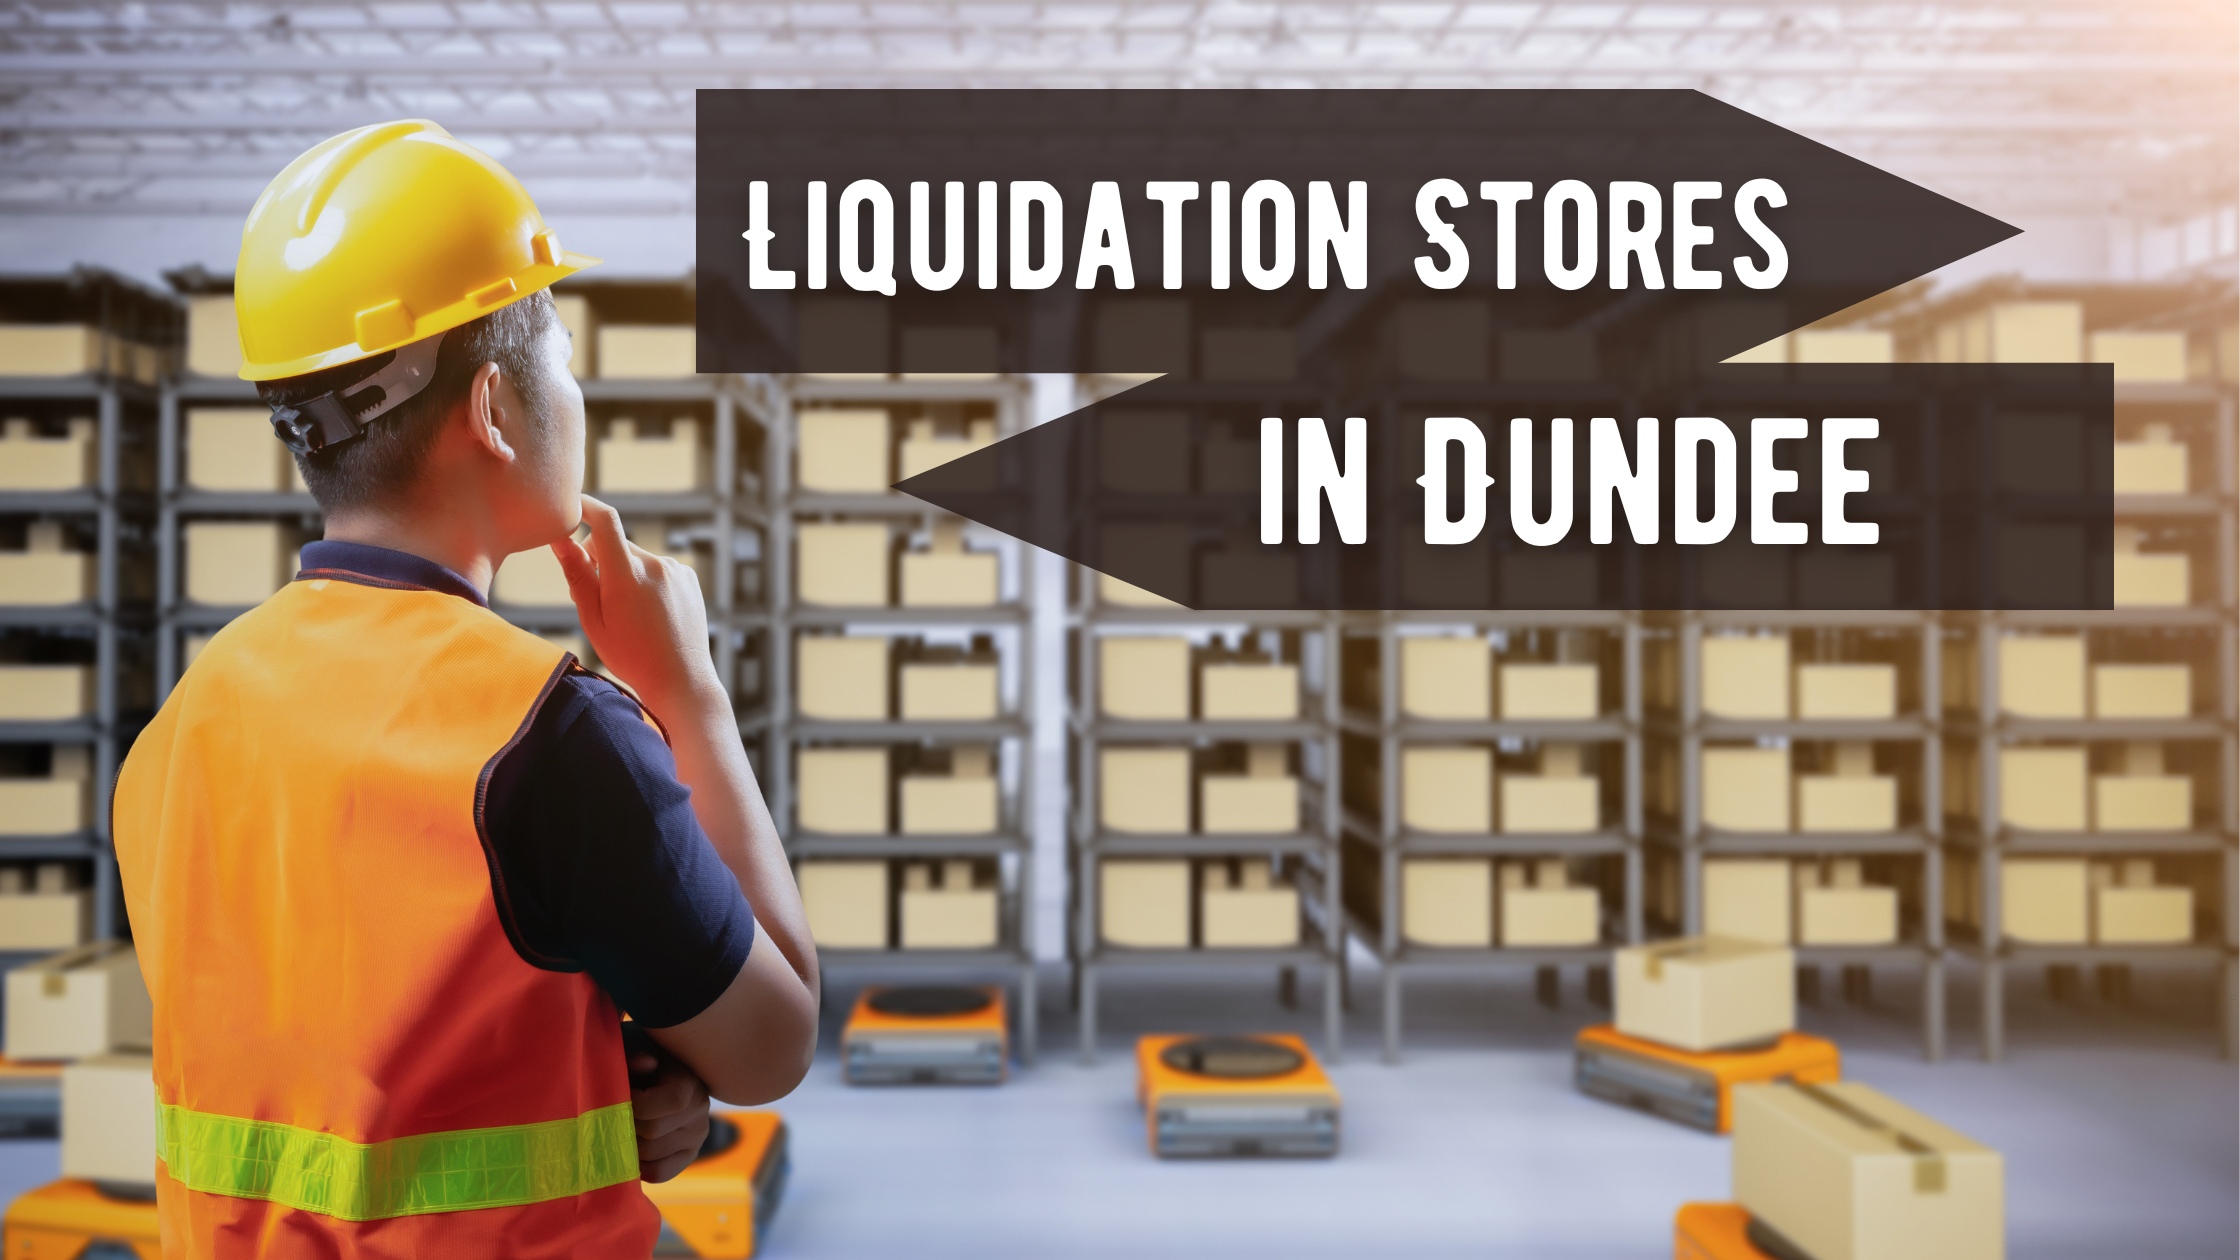 Liquidation Stores in Dundee